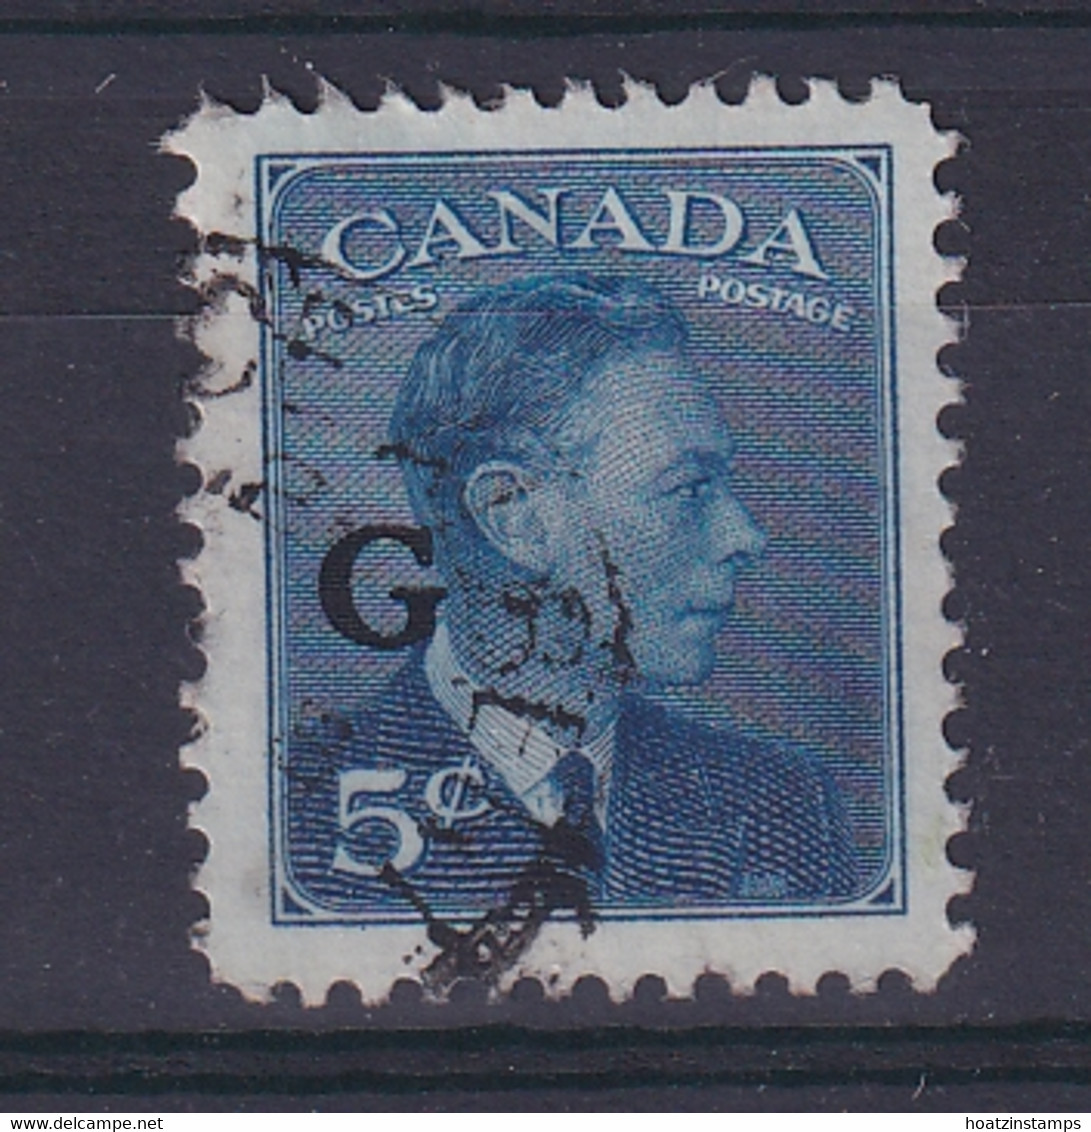 Canada: 1950/52   Official - KGVI 'G' OVPT   SG O184    5c   Used - Overprinted